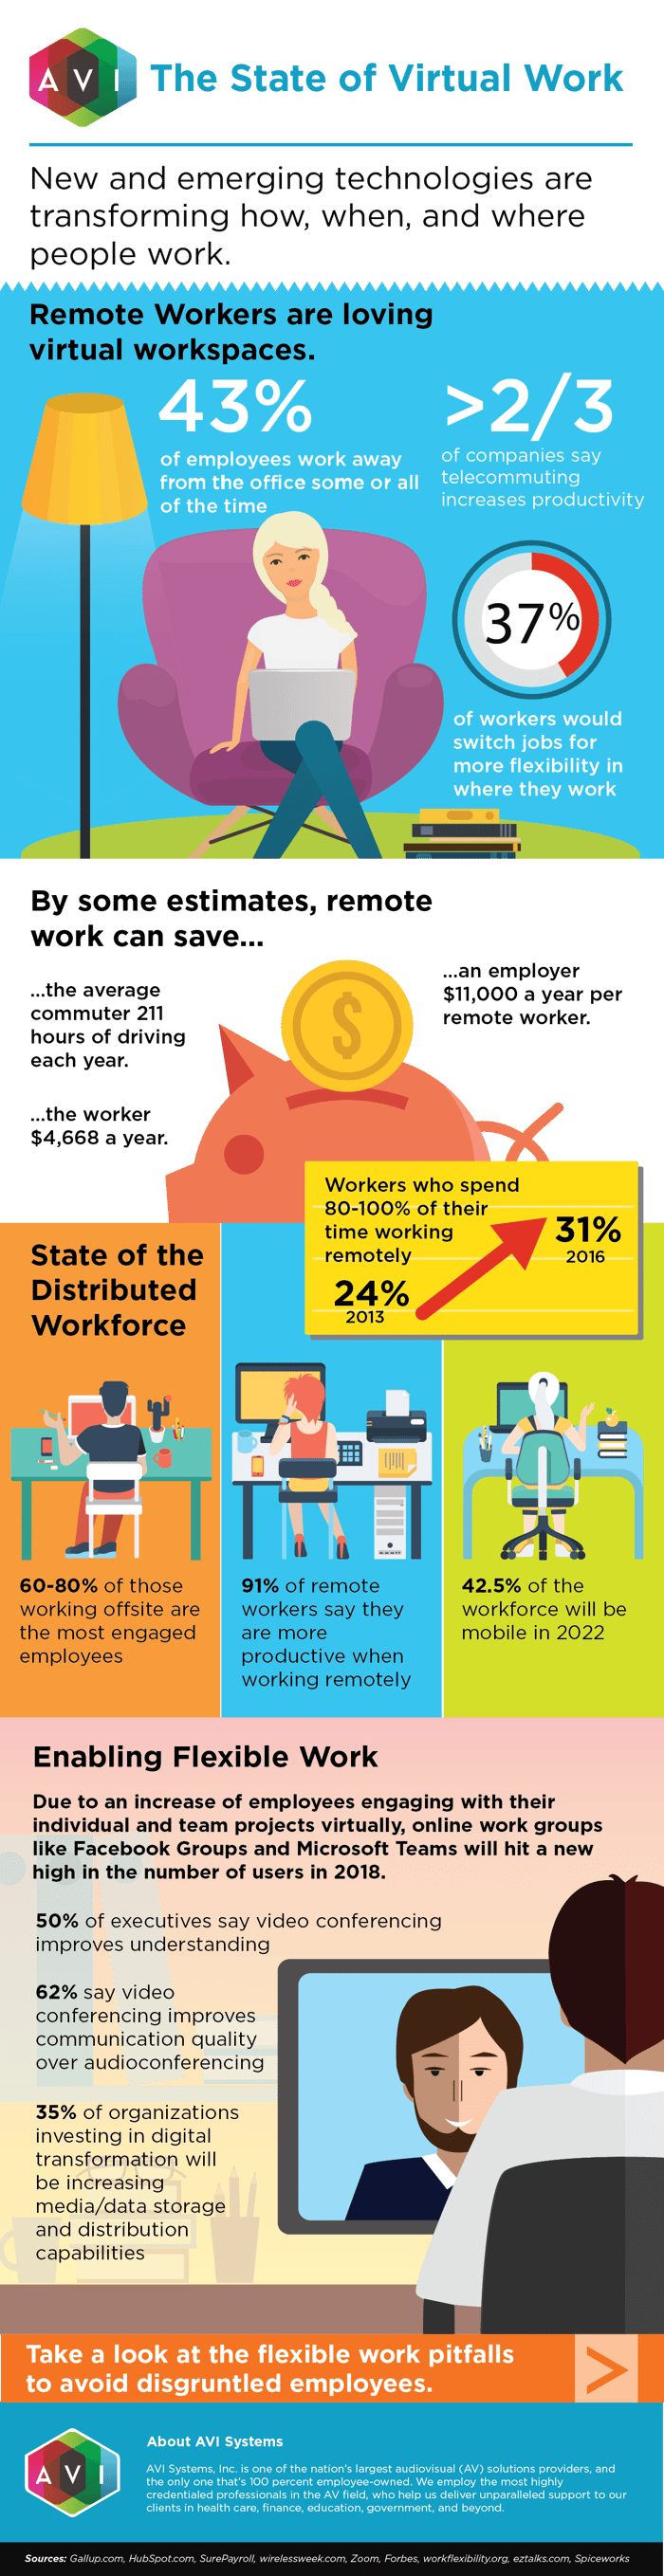 State of Virtual Work | AVI Systems